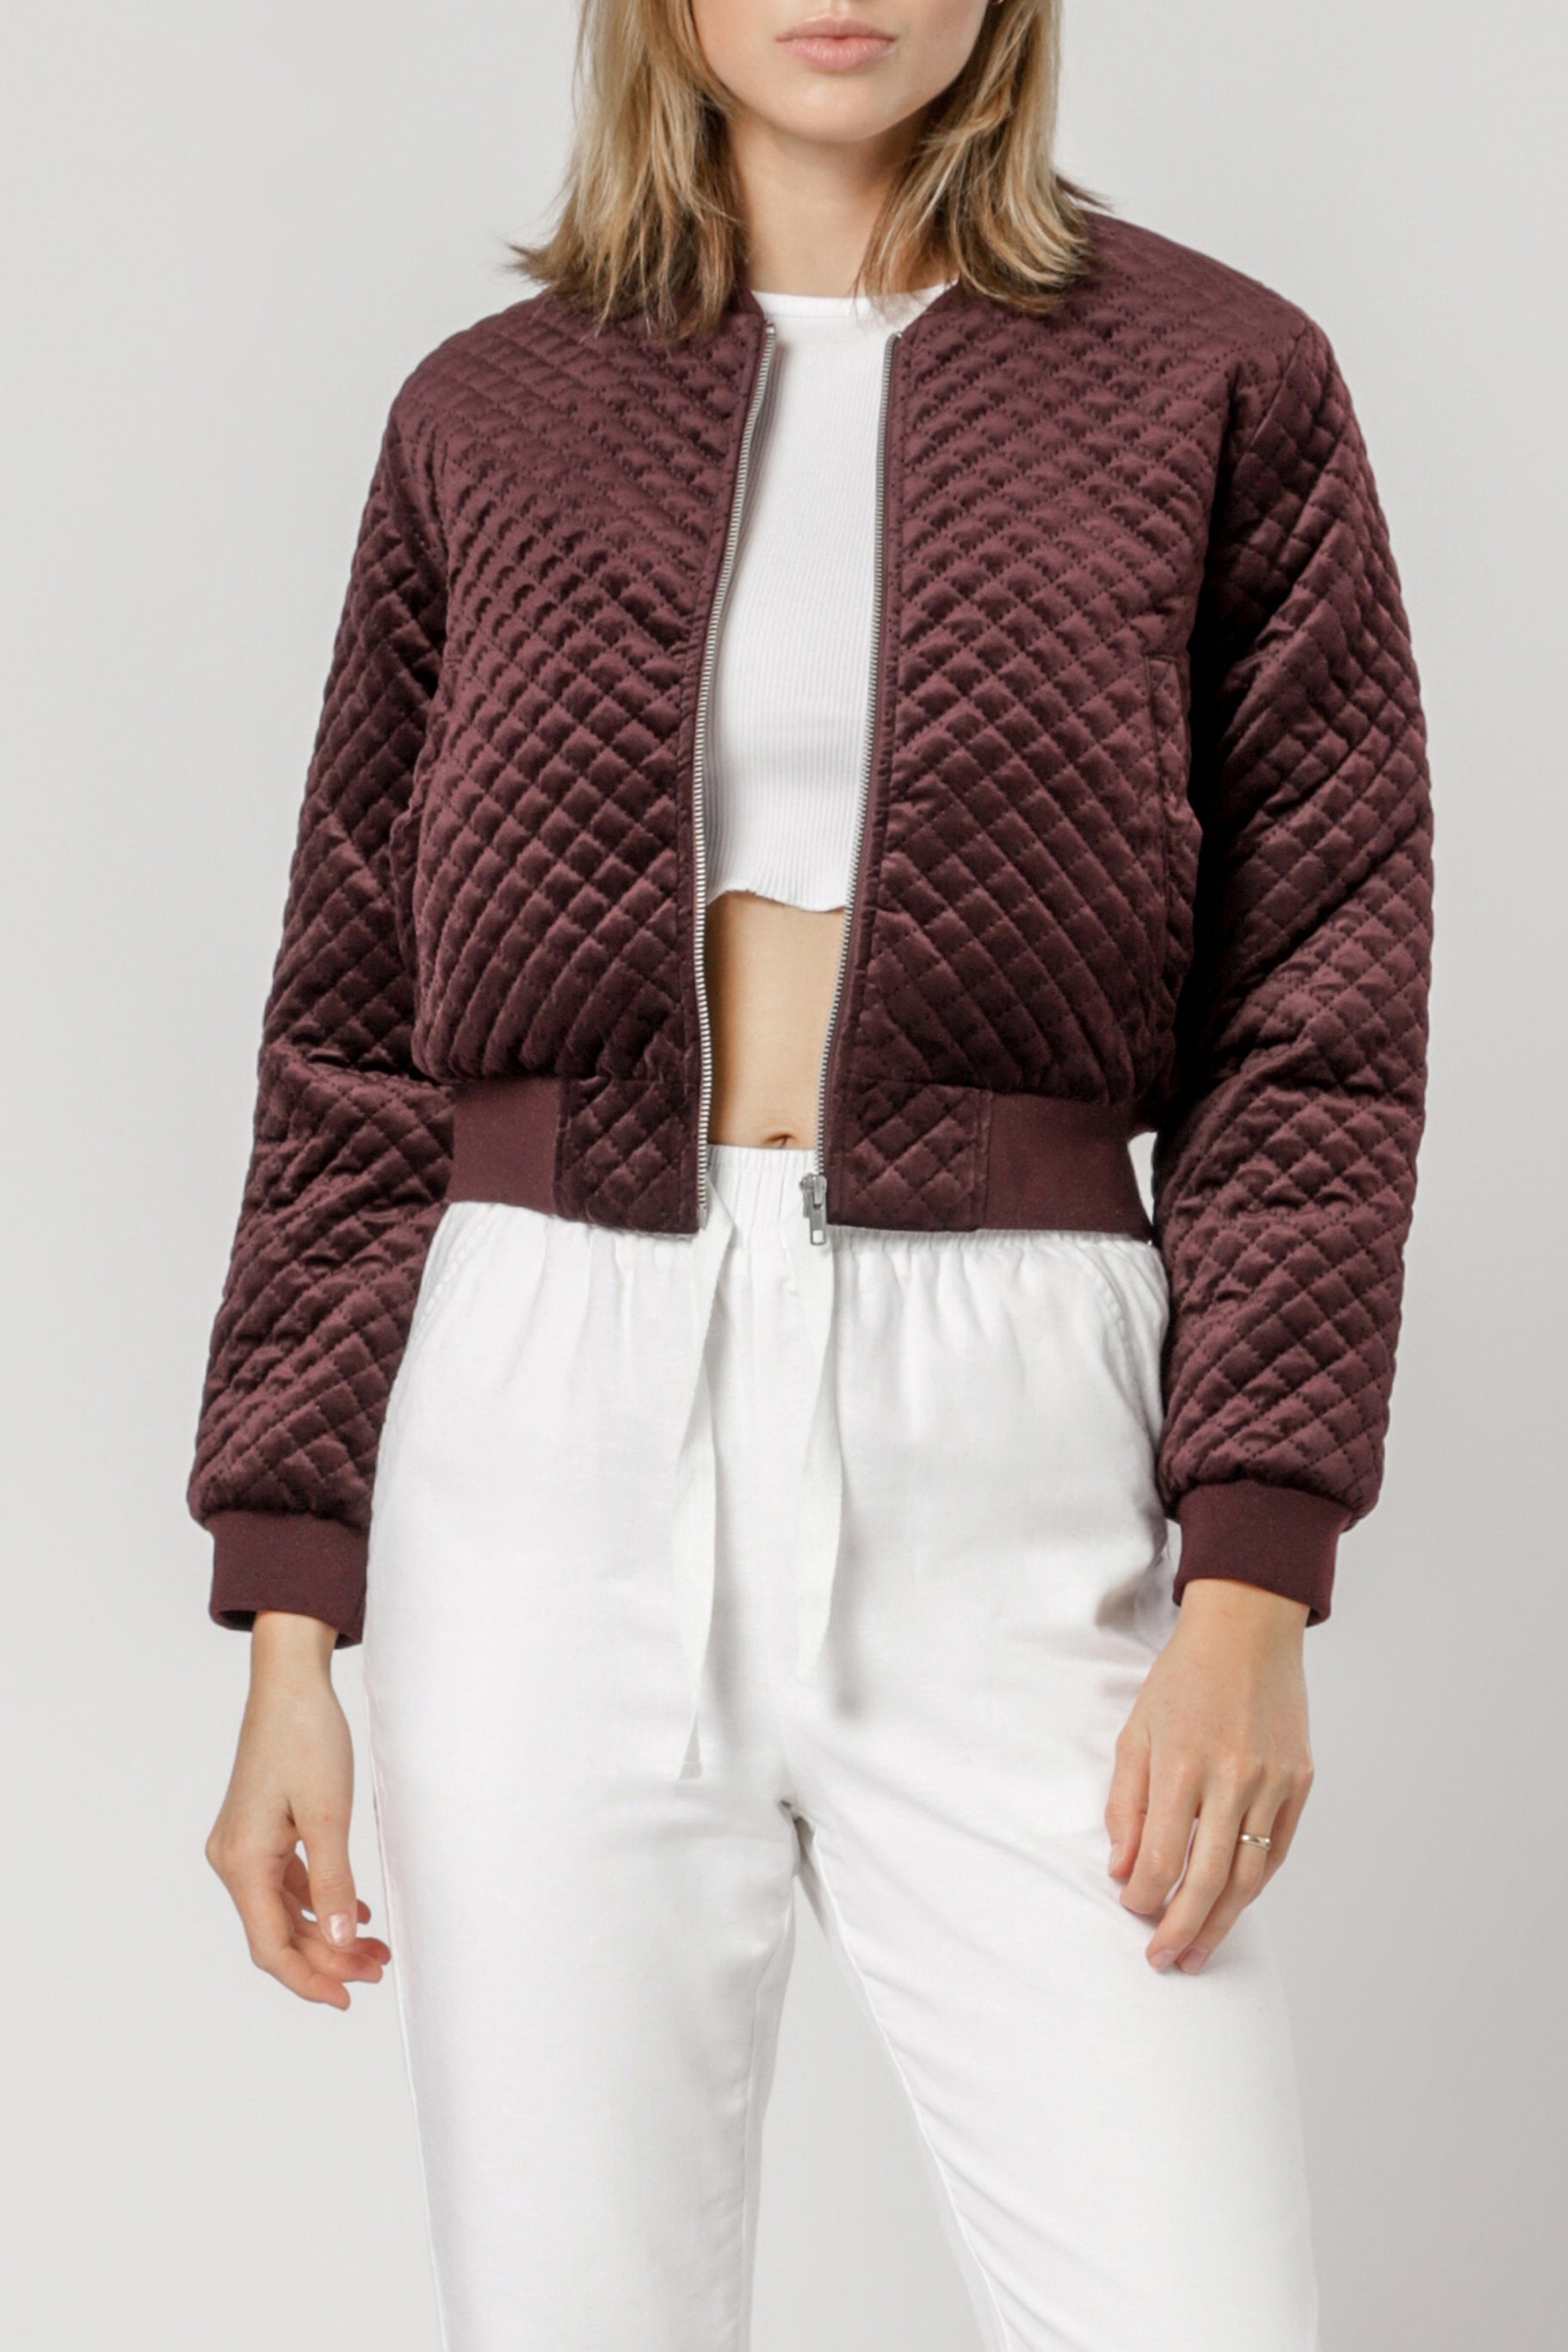 Nude Lucy New Frankie Bomber Berry Jackets 